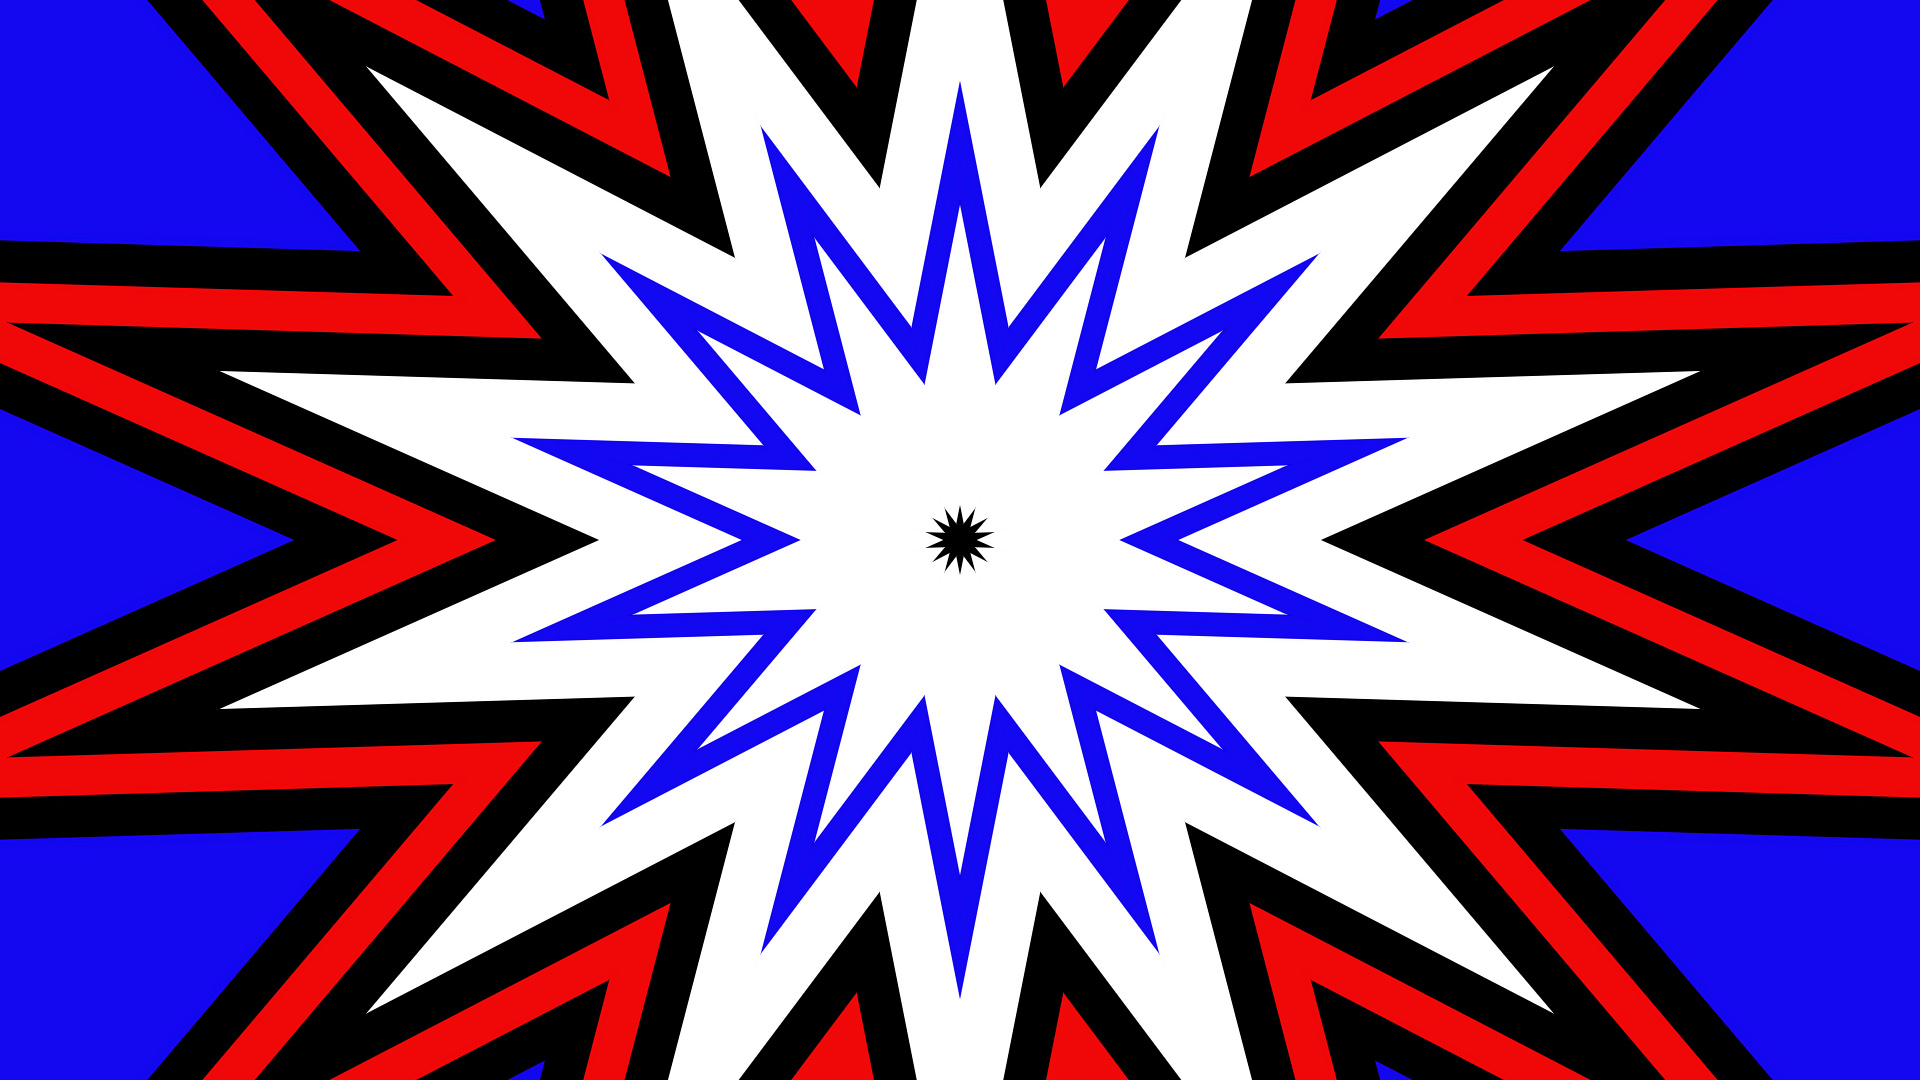 Abstract Artistic Blue Colors Digital Art Geometry Kaleidoscope Pattern Red Shapes Star White 1920x1080